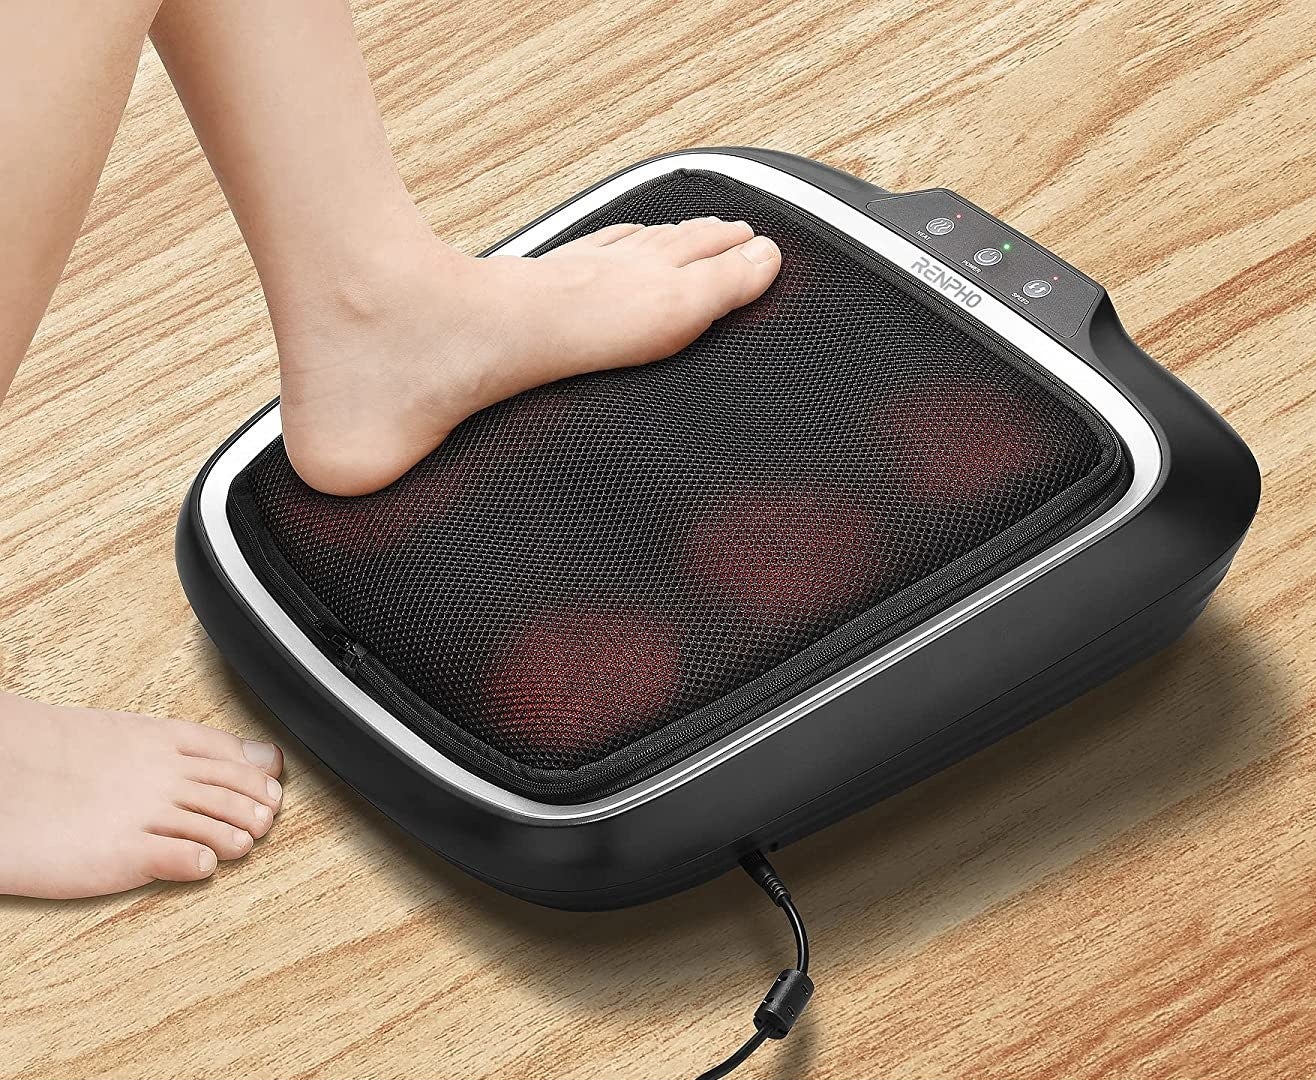 A person putting their foot on the massager